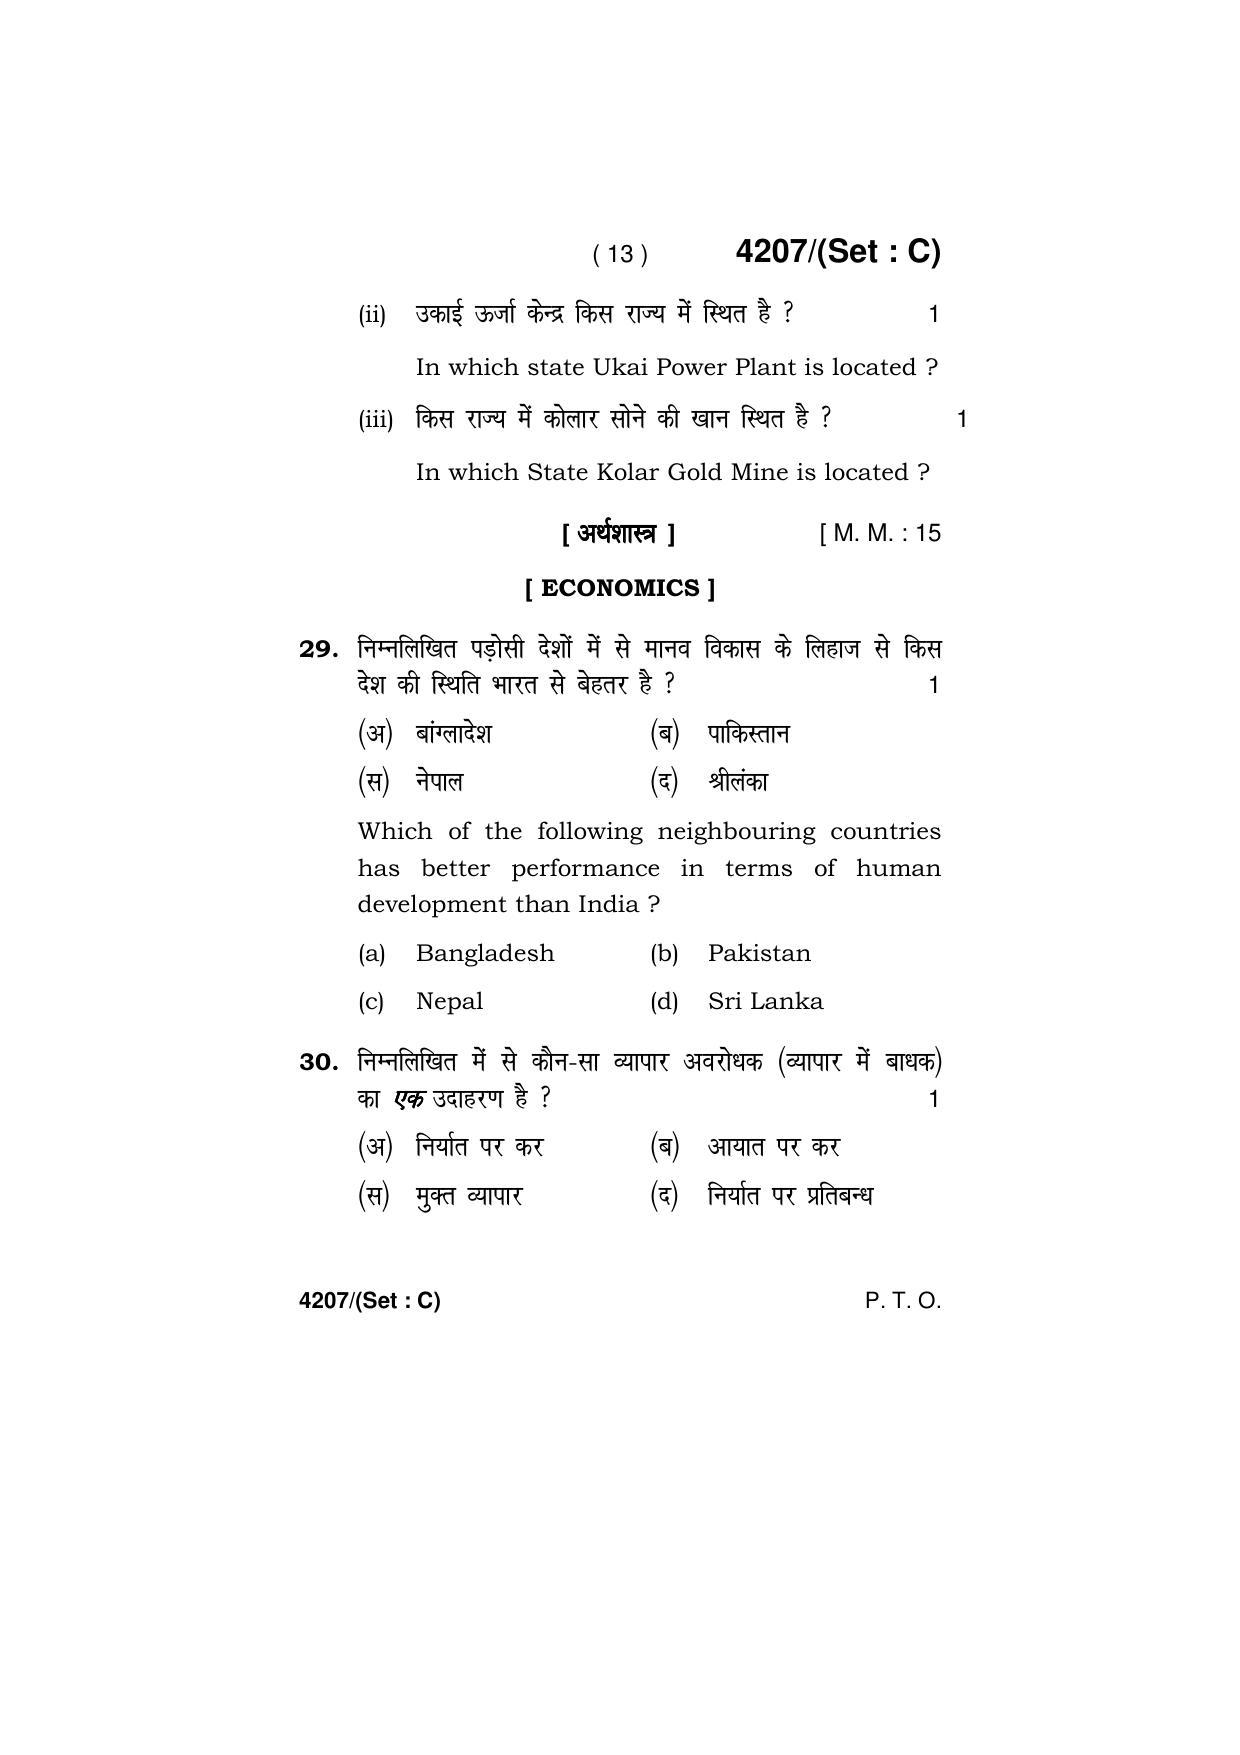 Haryana Board HBSE Class 10 Social Science (All Set) 2019 Question Paper - Page 43